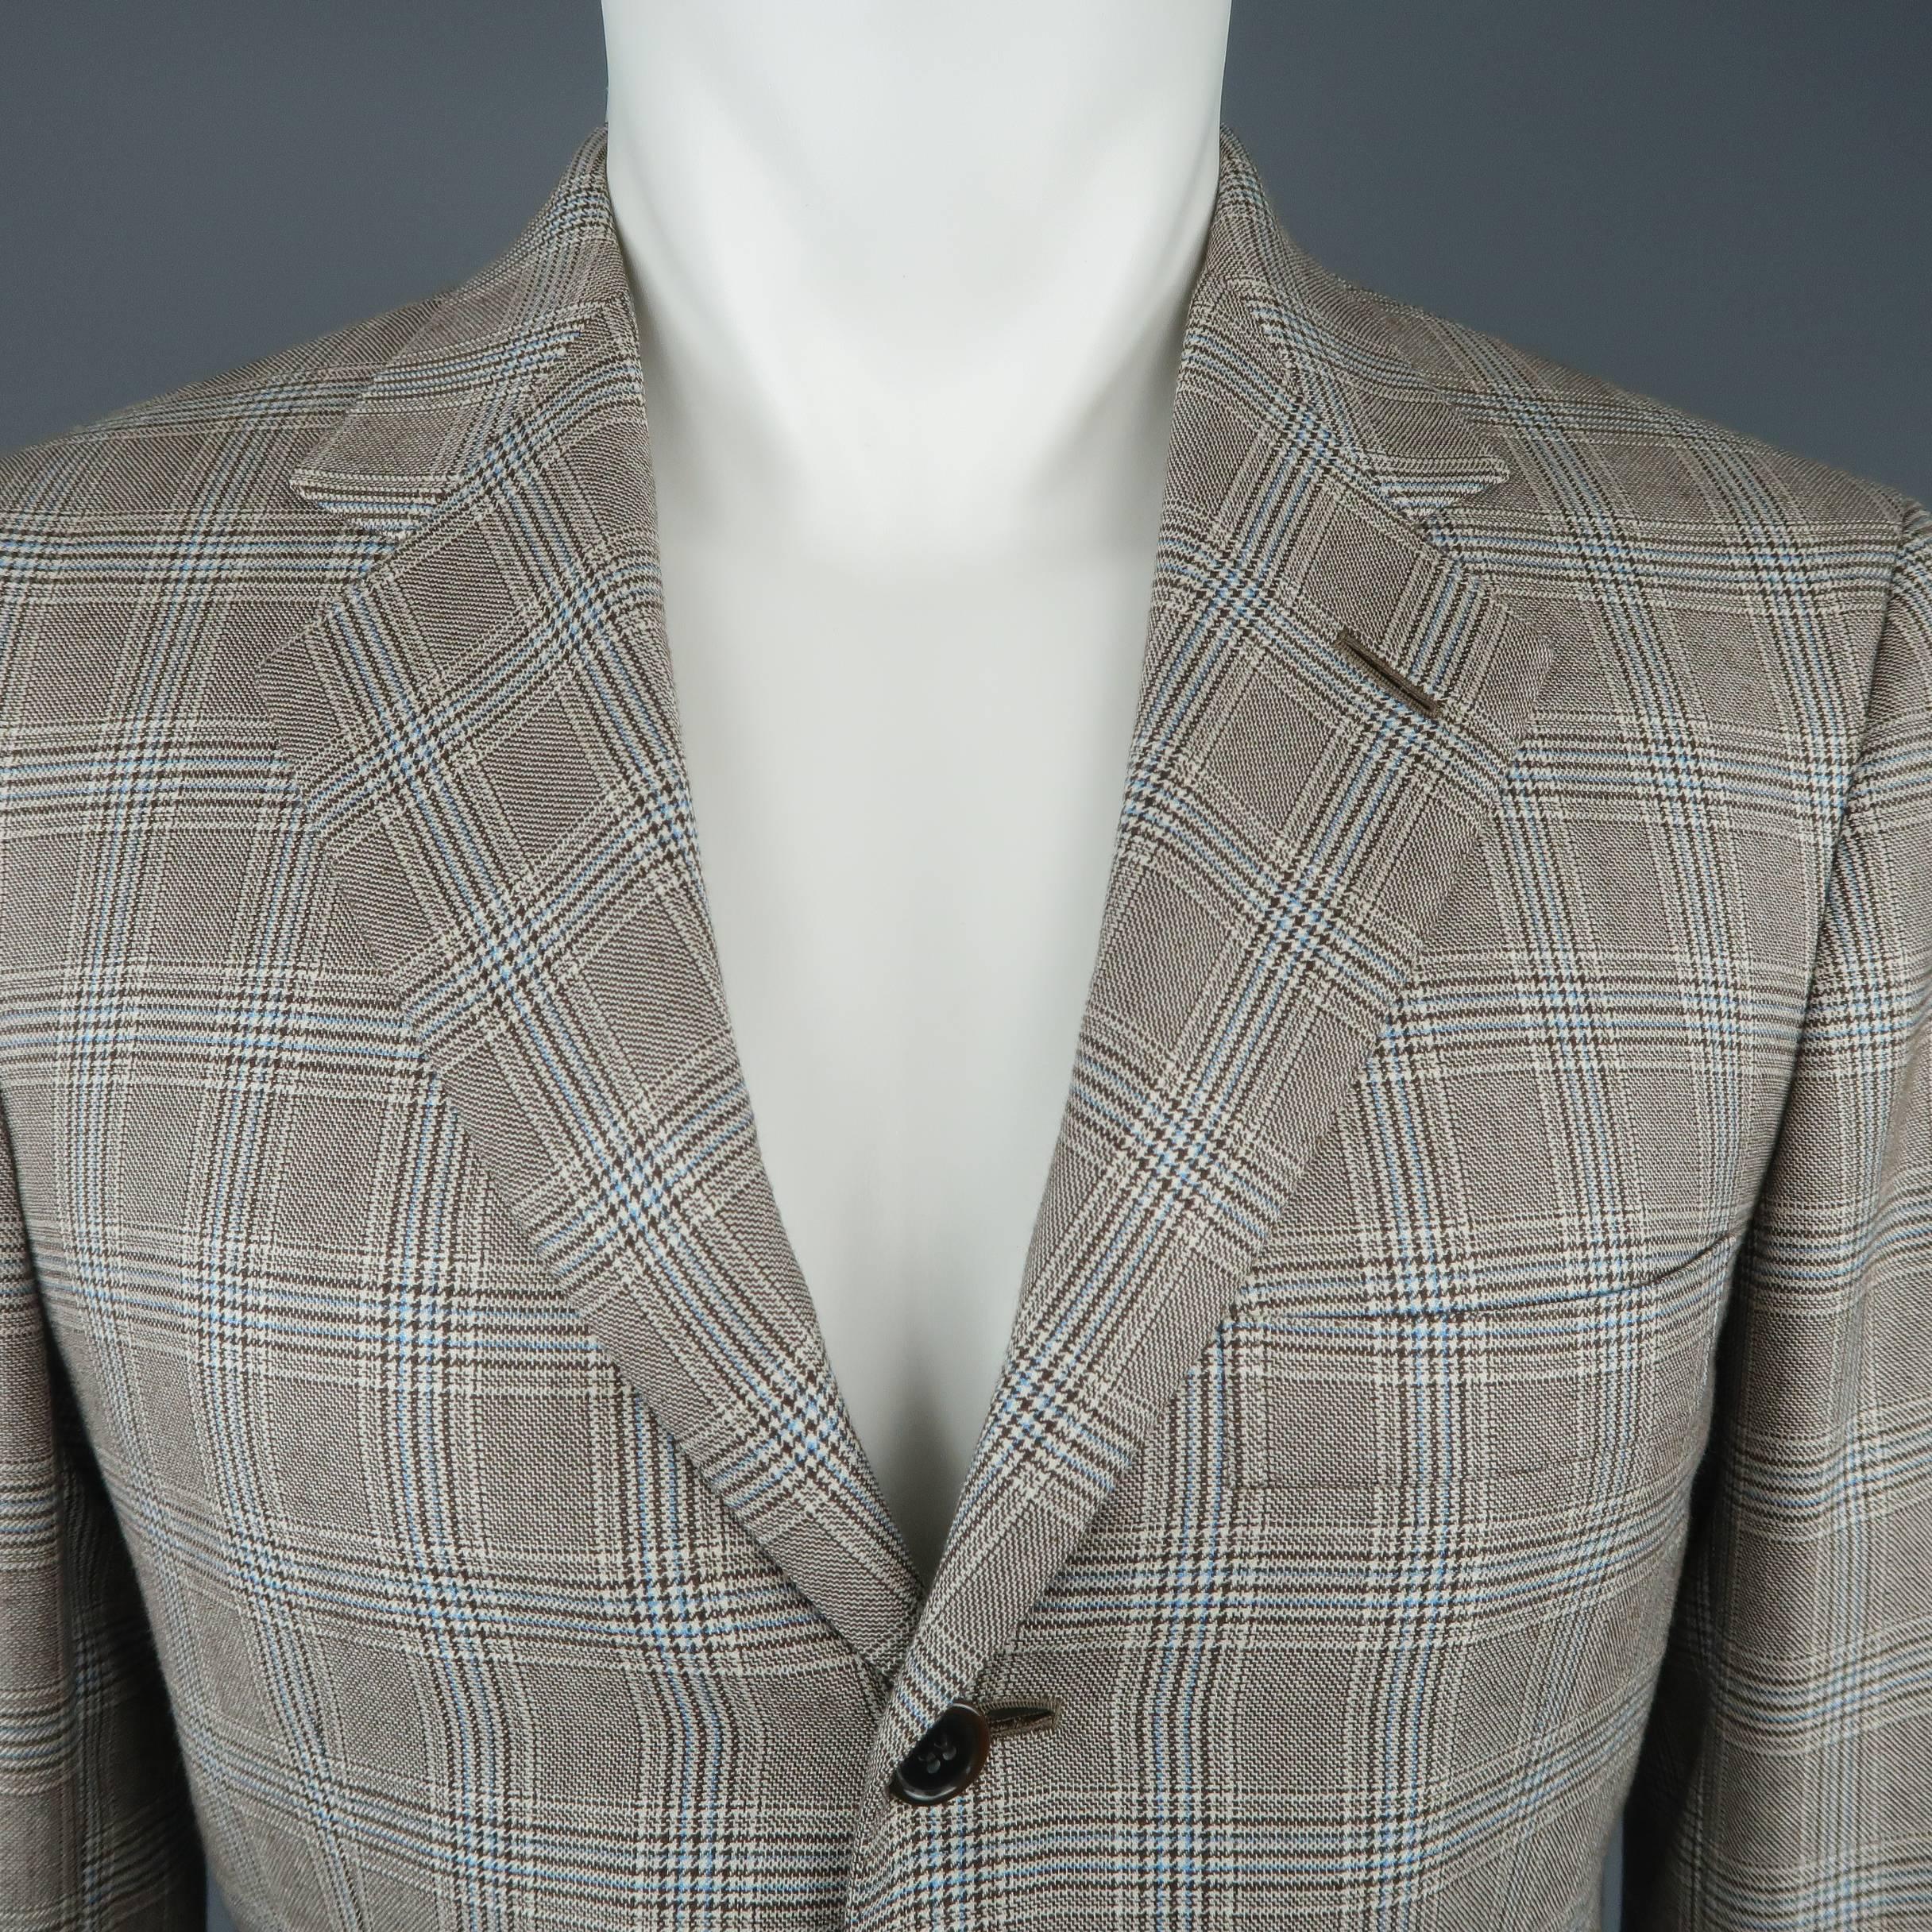 Vintage BRIONI single breasted sport coat comes in beige and brown glenplaid wool silk blend with light blue accents, three button front, notch lapel, and functional button cuff. Made in Italy.
 
Excellent Pre-Owned Condition.
Marked: 38